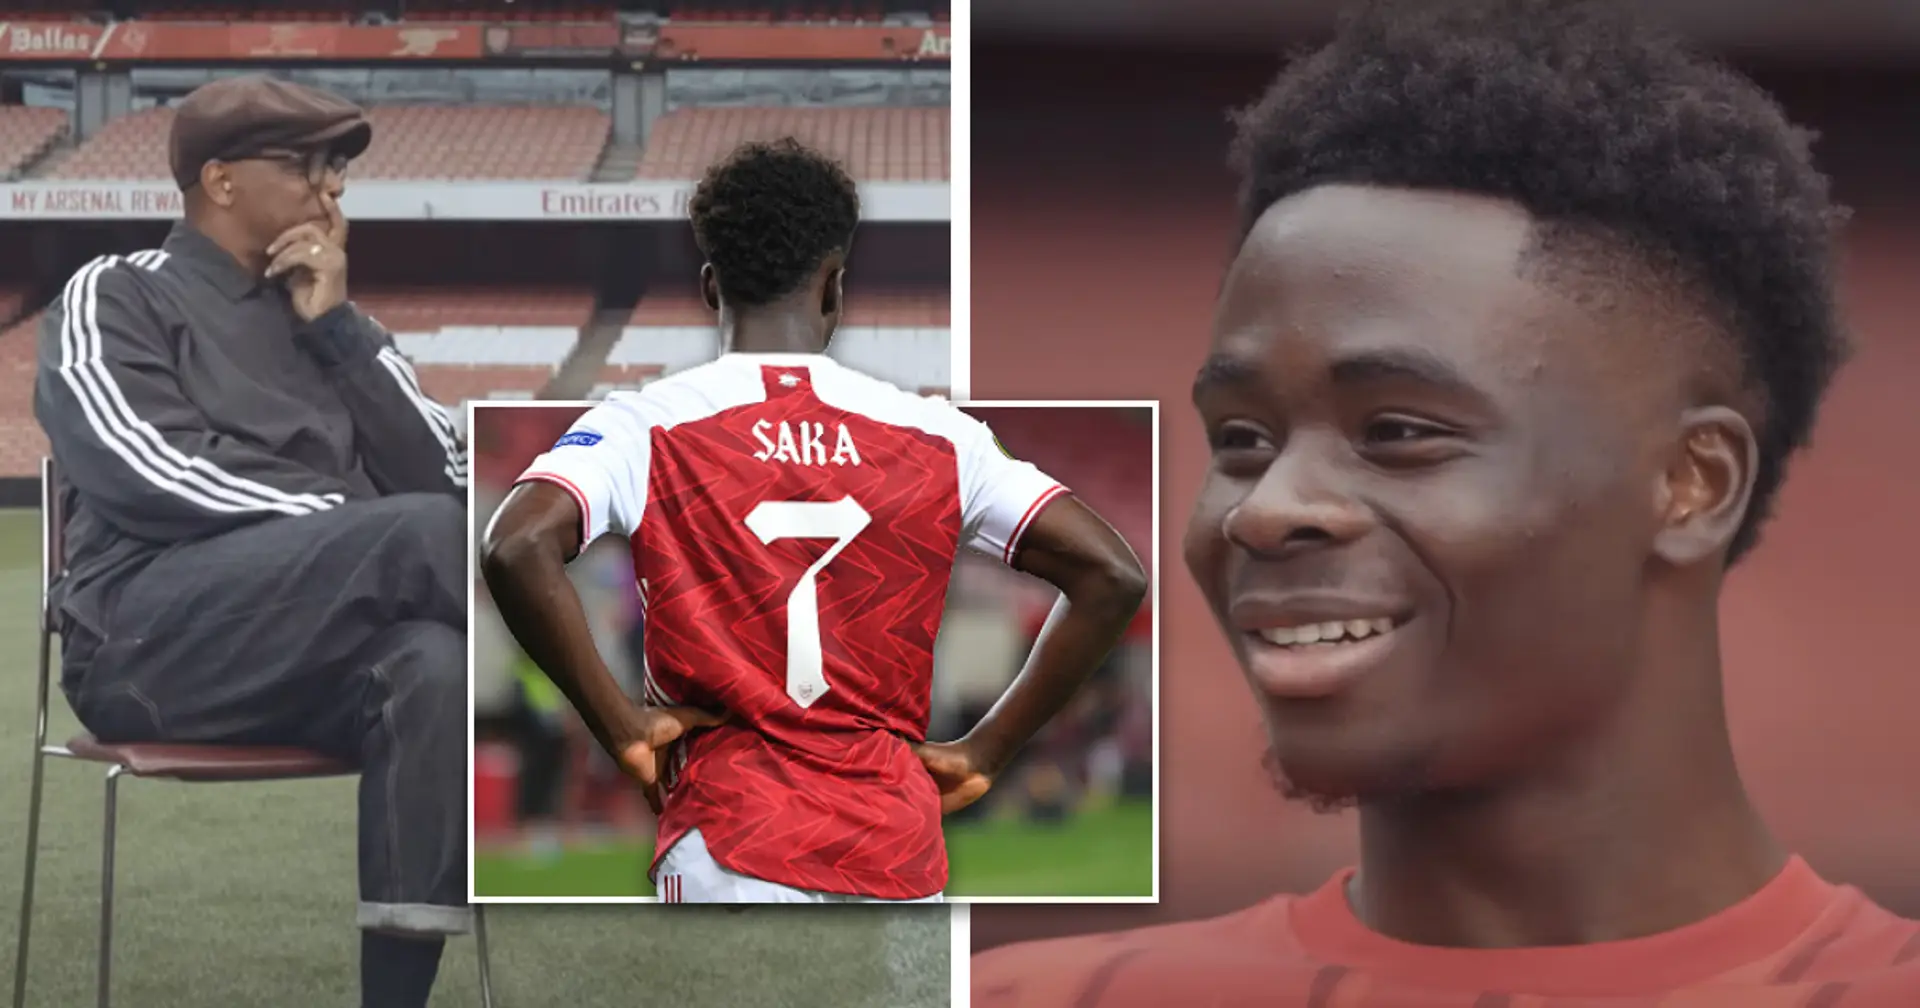 'I had the conversation with him': Saka reveals who offered him to wear the No.7 shirt for Arsenal - not Arteta